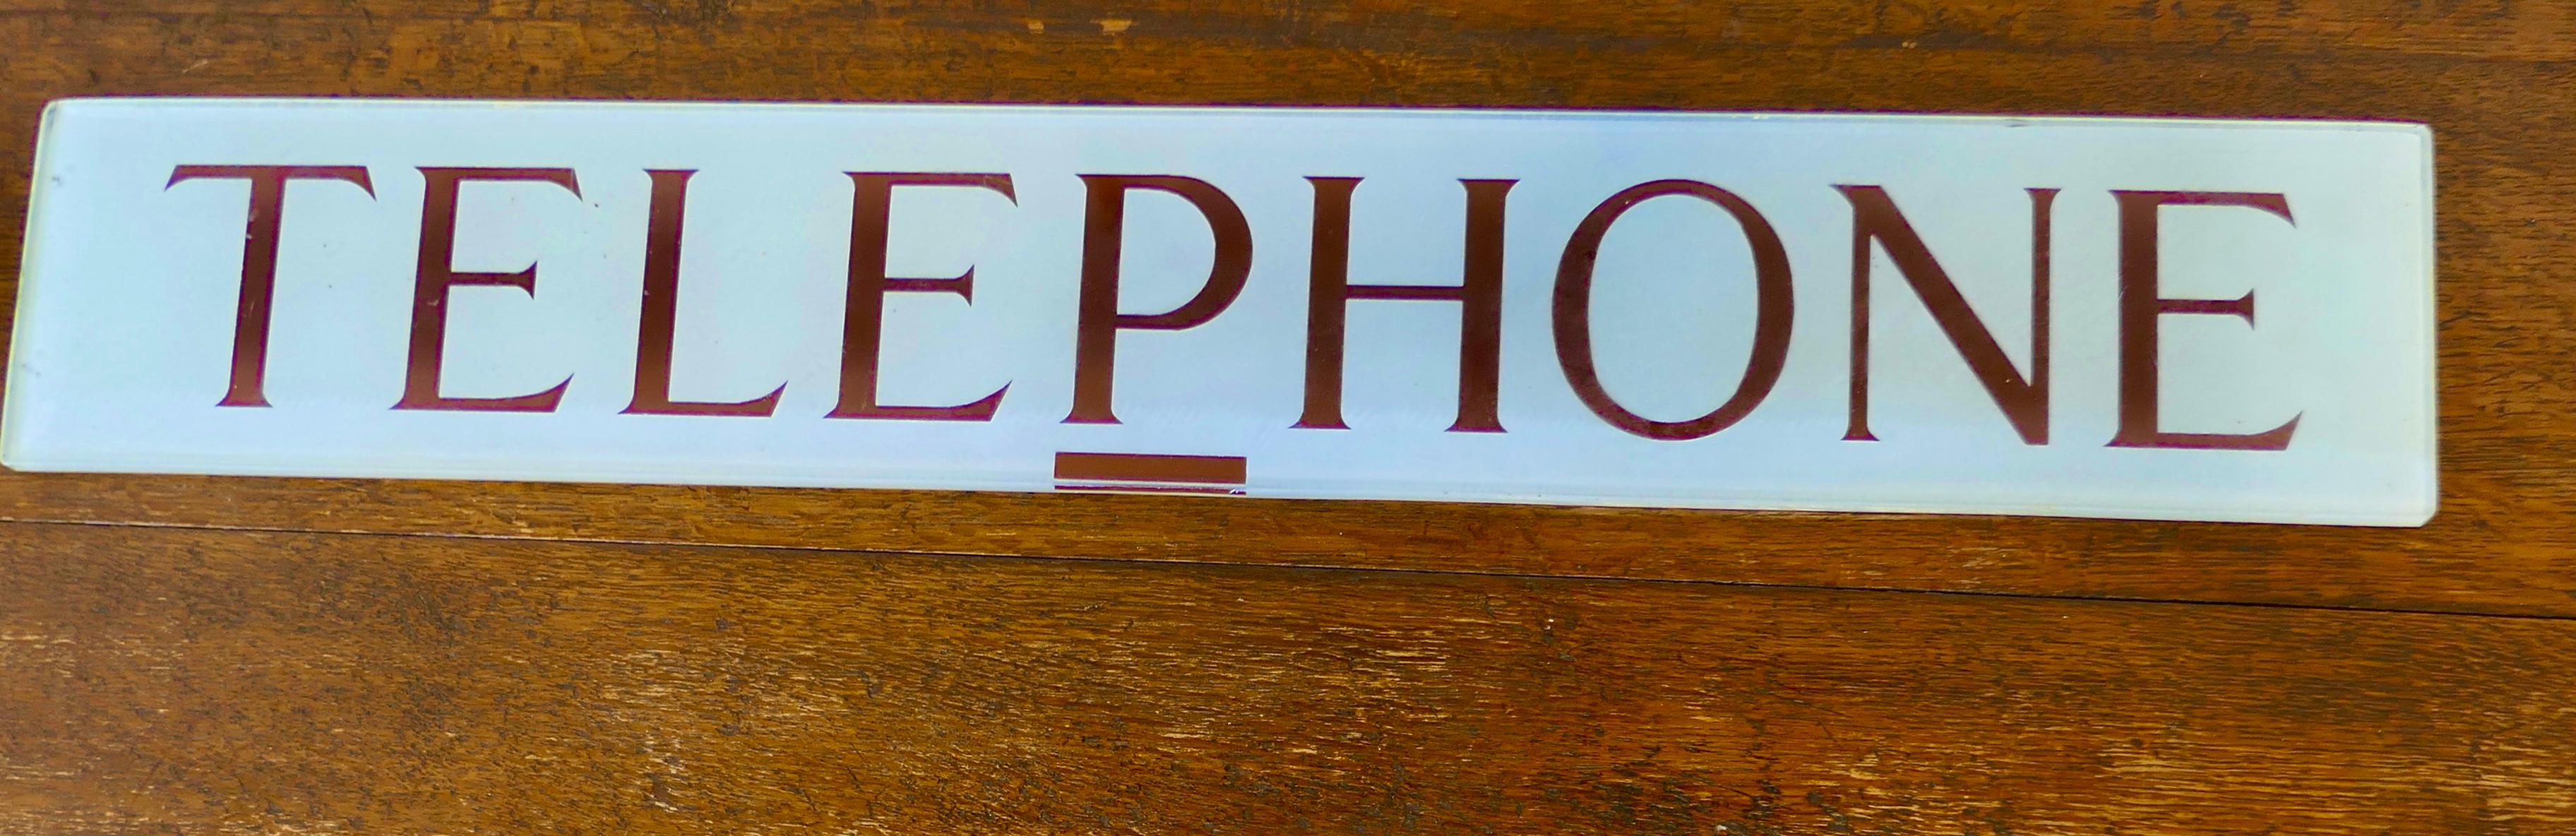 Mid-Century Modern Original GPO Glass “TELEPHONE” sign from a Red Phone Box  From the 1950s   For Sale